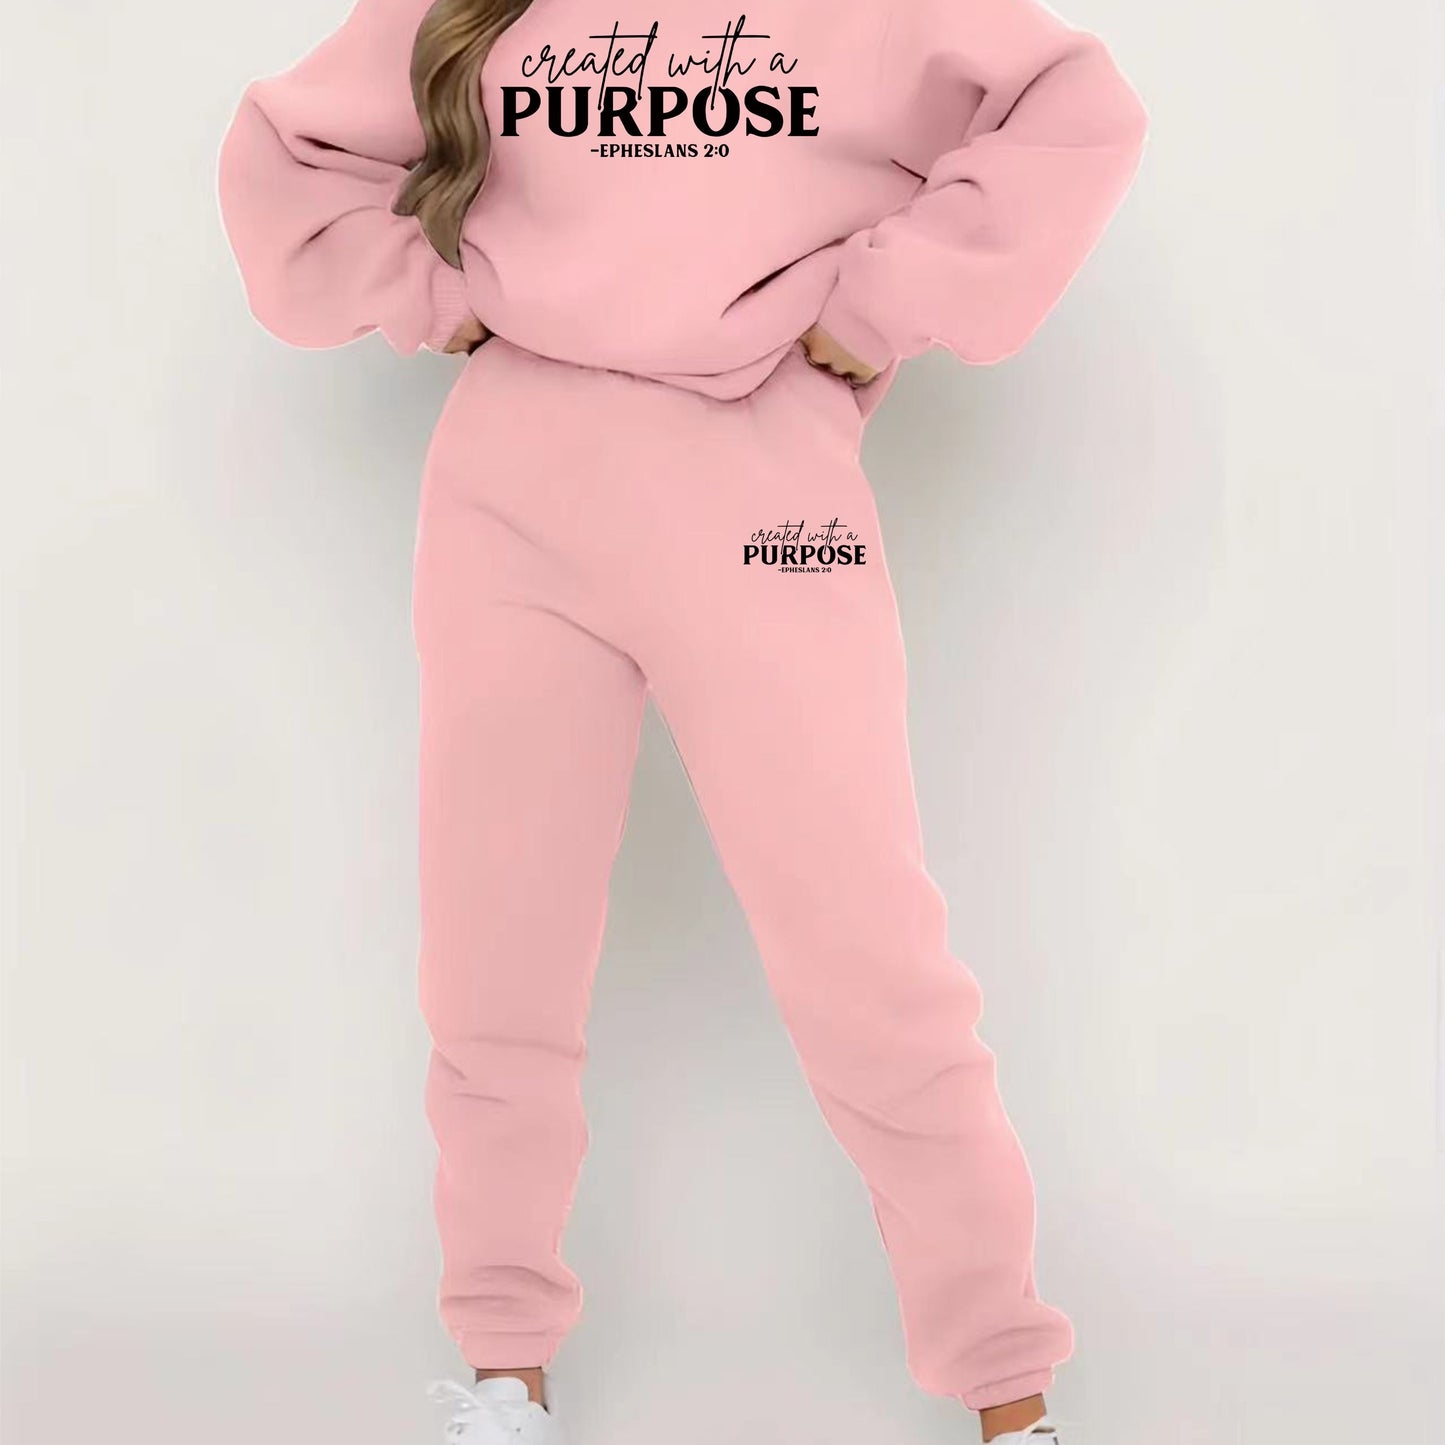 Created With A Purpose Women's Christian Casual Outfit claimedbygoddesigns